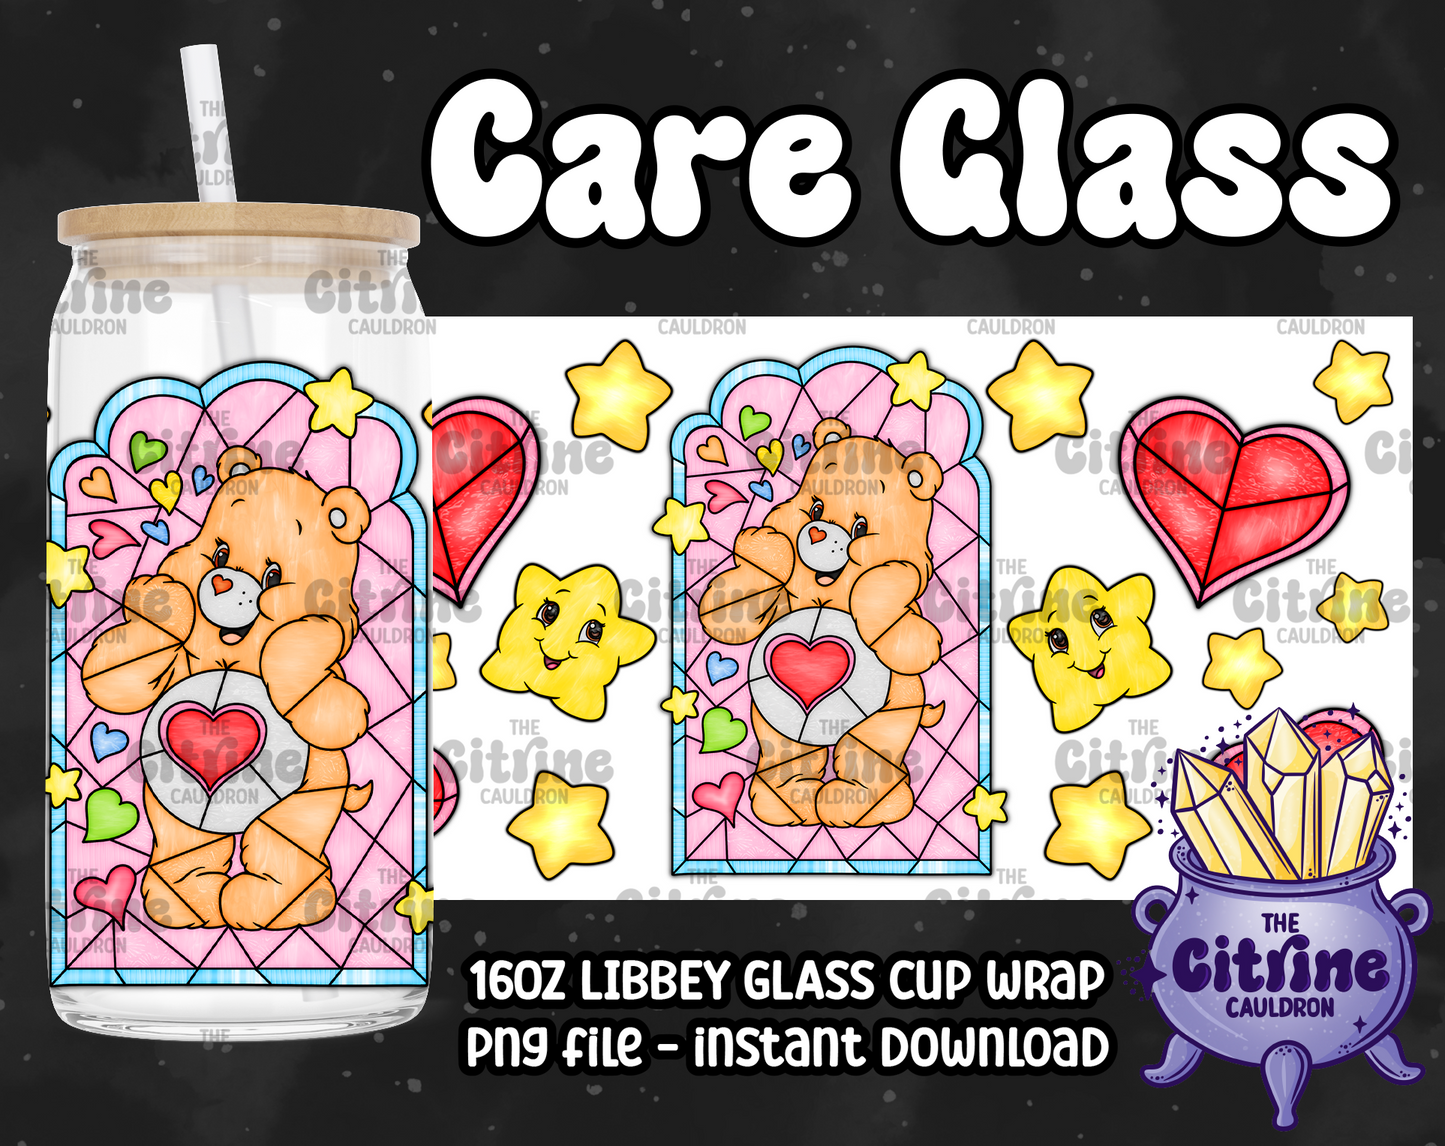 Care Glass - PNG Wrap for Libbey 16oz Glass Can